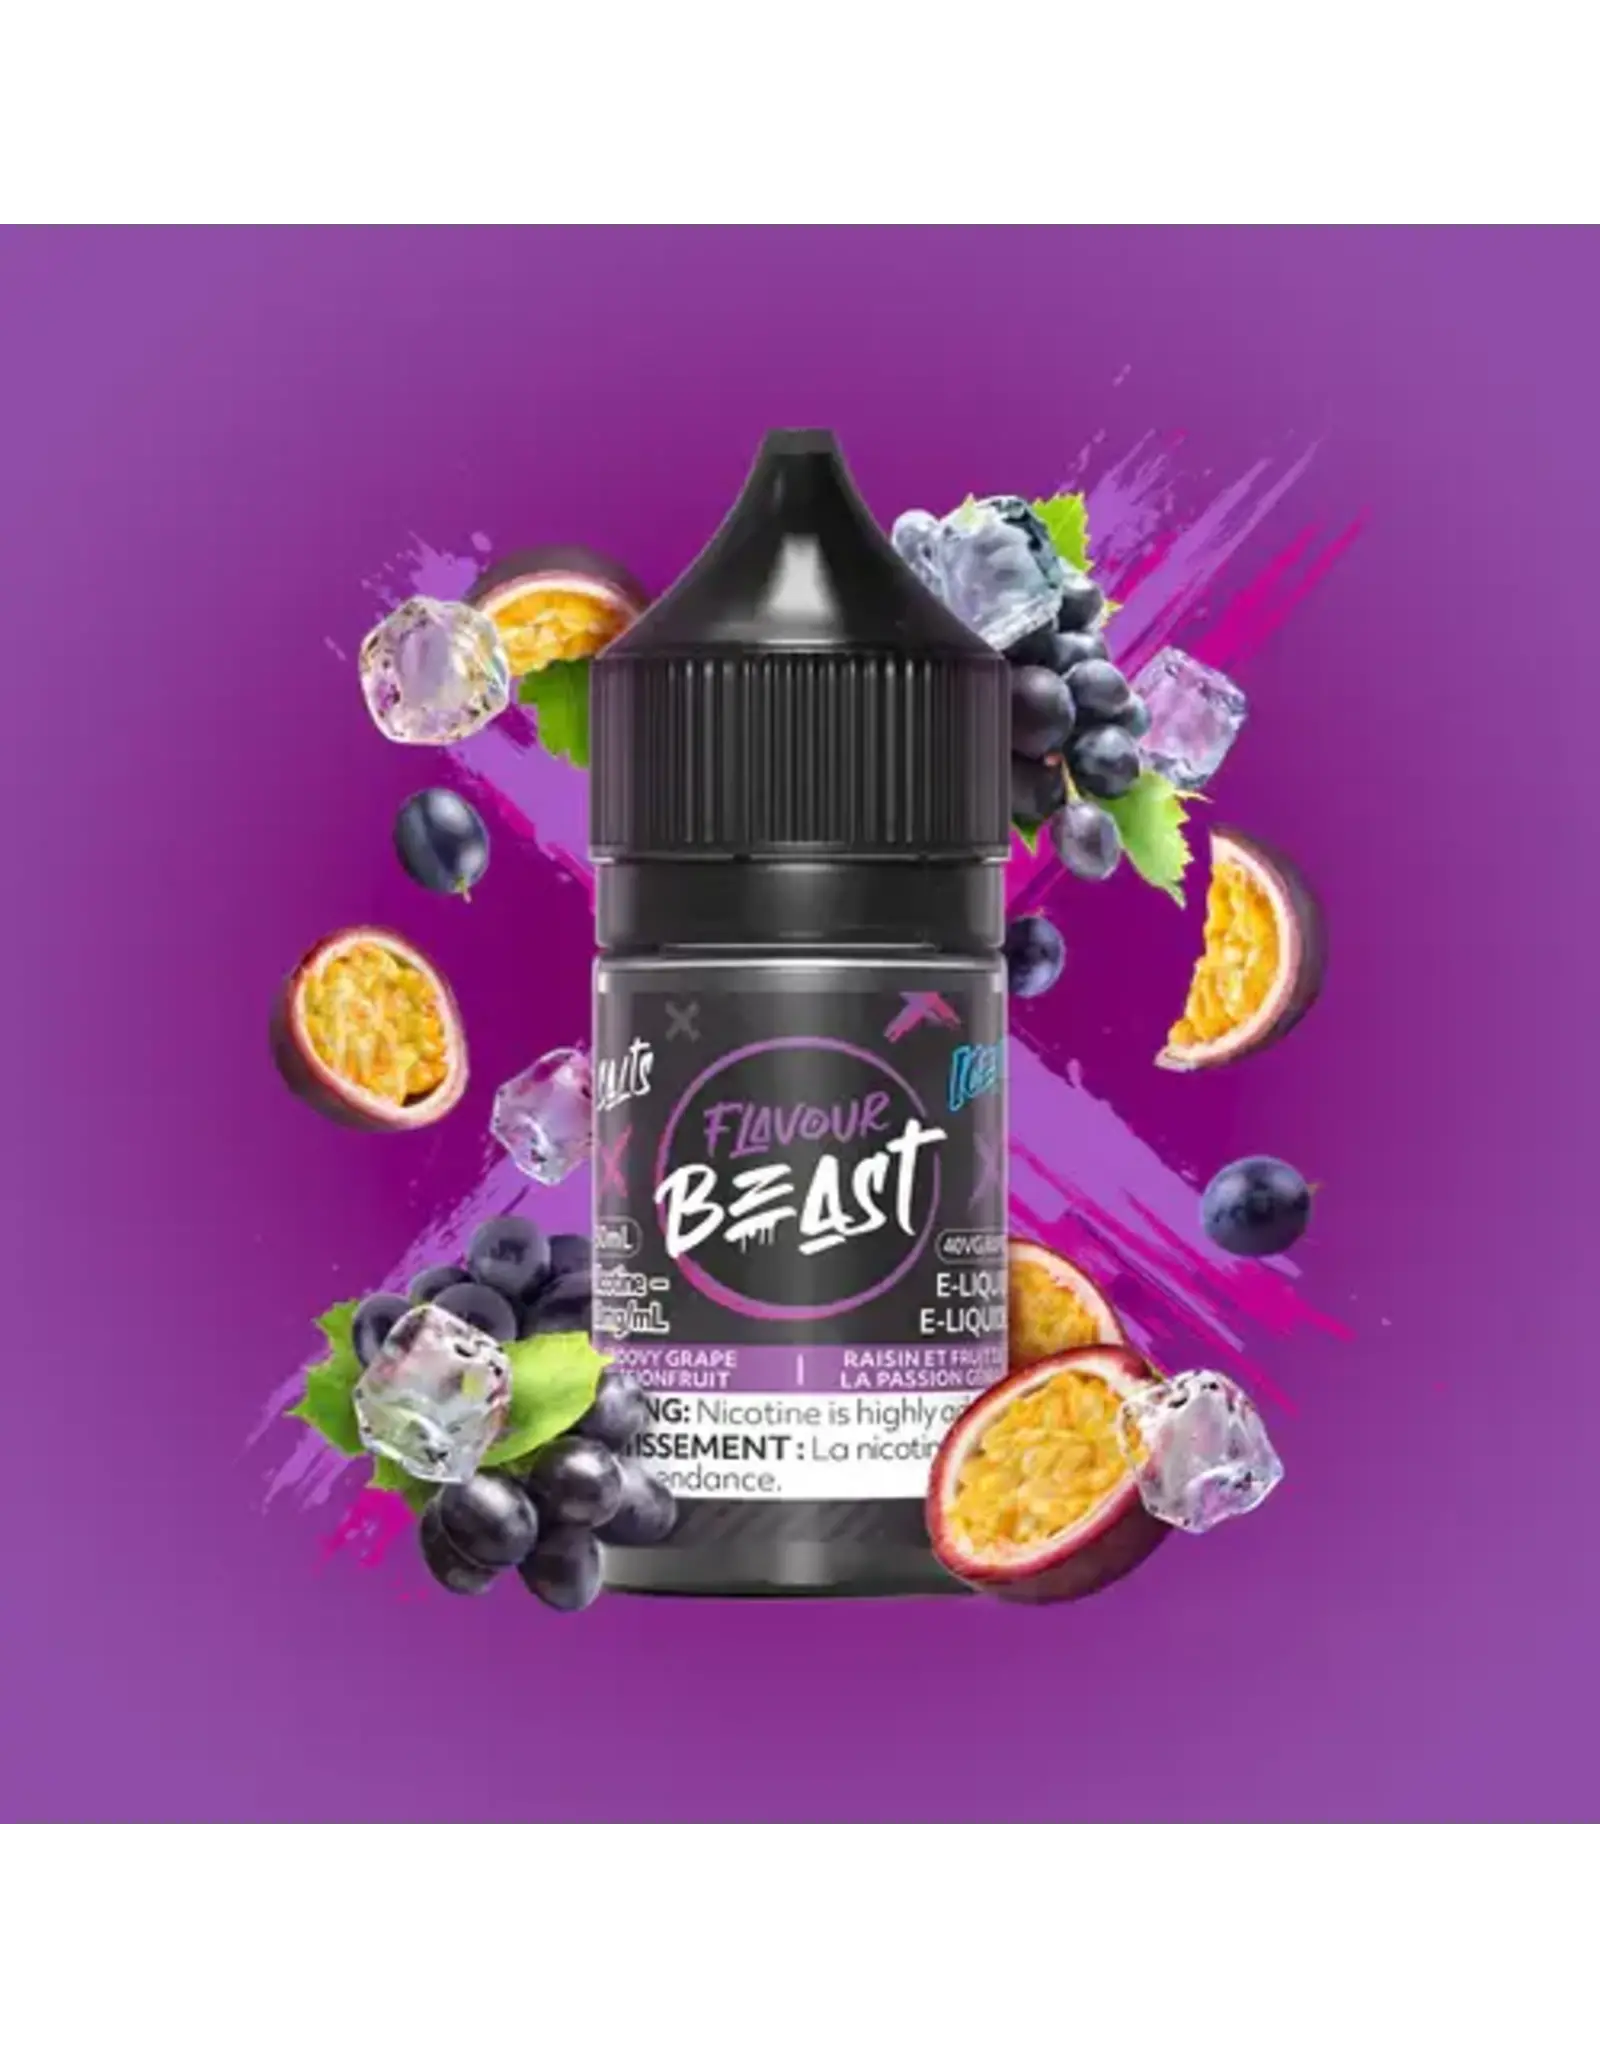 Flavour Beast E-Liquid Flavour Beast E-Liquid GROOVY GRAPE PASSIONFRUIT ICED(30ml/20mg)